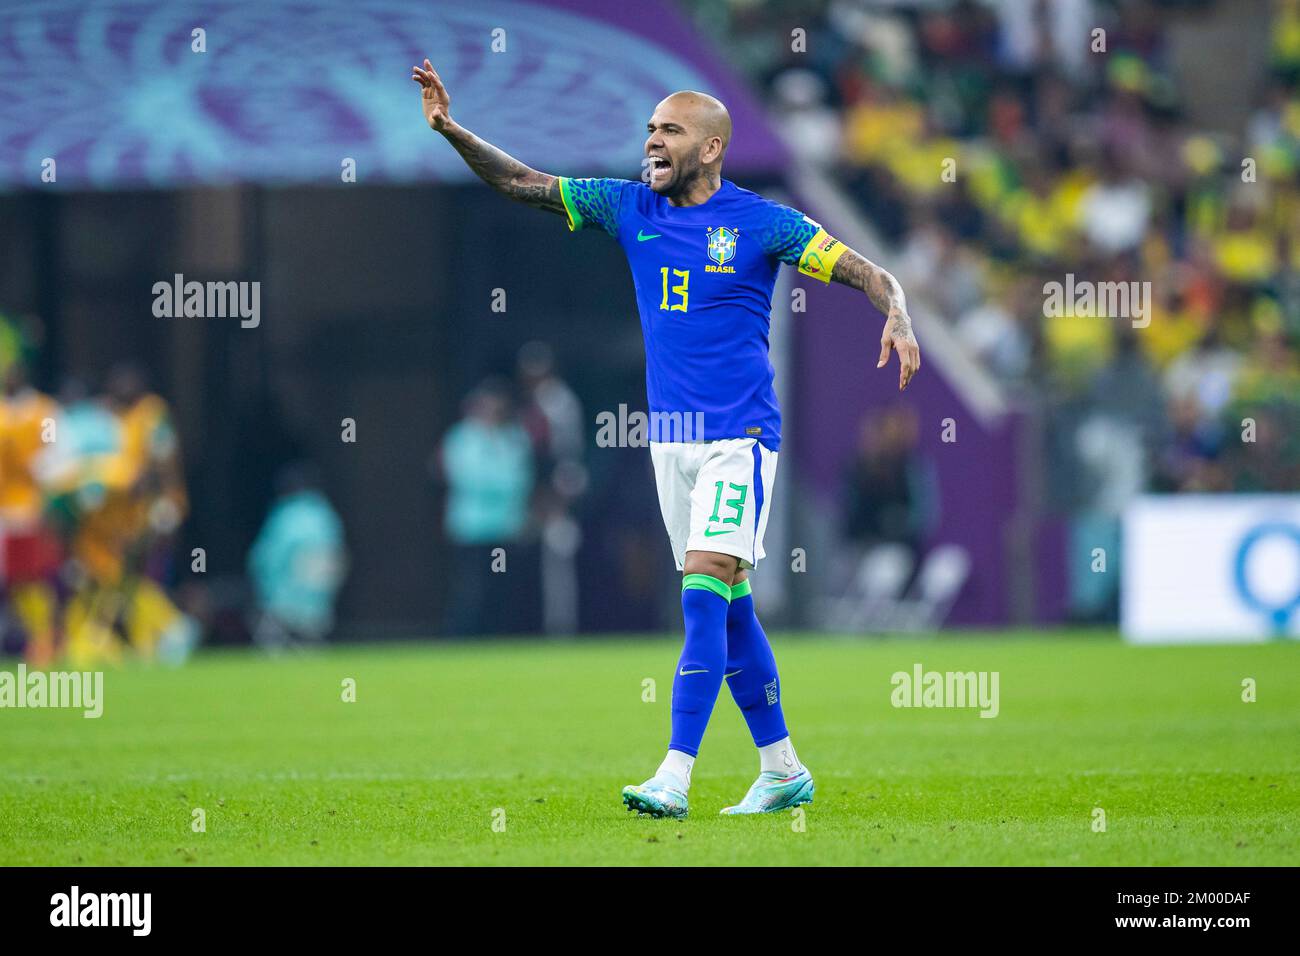 Lusail, Qatar. 02nd Dec, 2022. Soccer: World Cup, Cameroon - Brazil, preliminary round, Group G, Matchday 3, Lusail Stadium, Brazil's Dani Alves gestures. Credit: Tom Weller/dpa/Alamy Live News Stock Photo